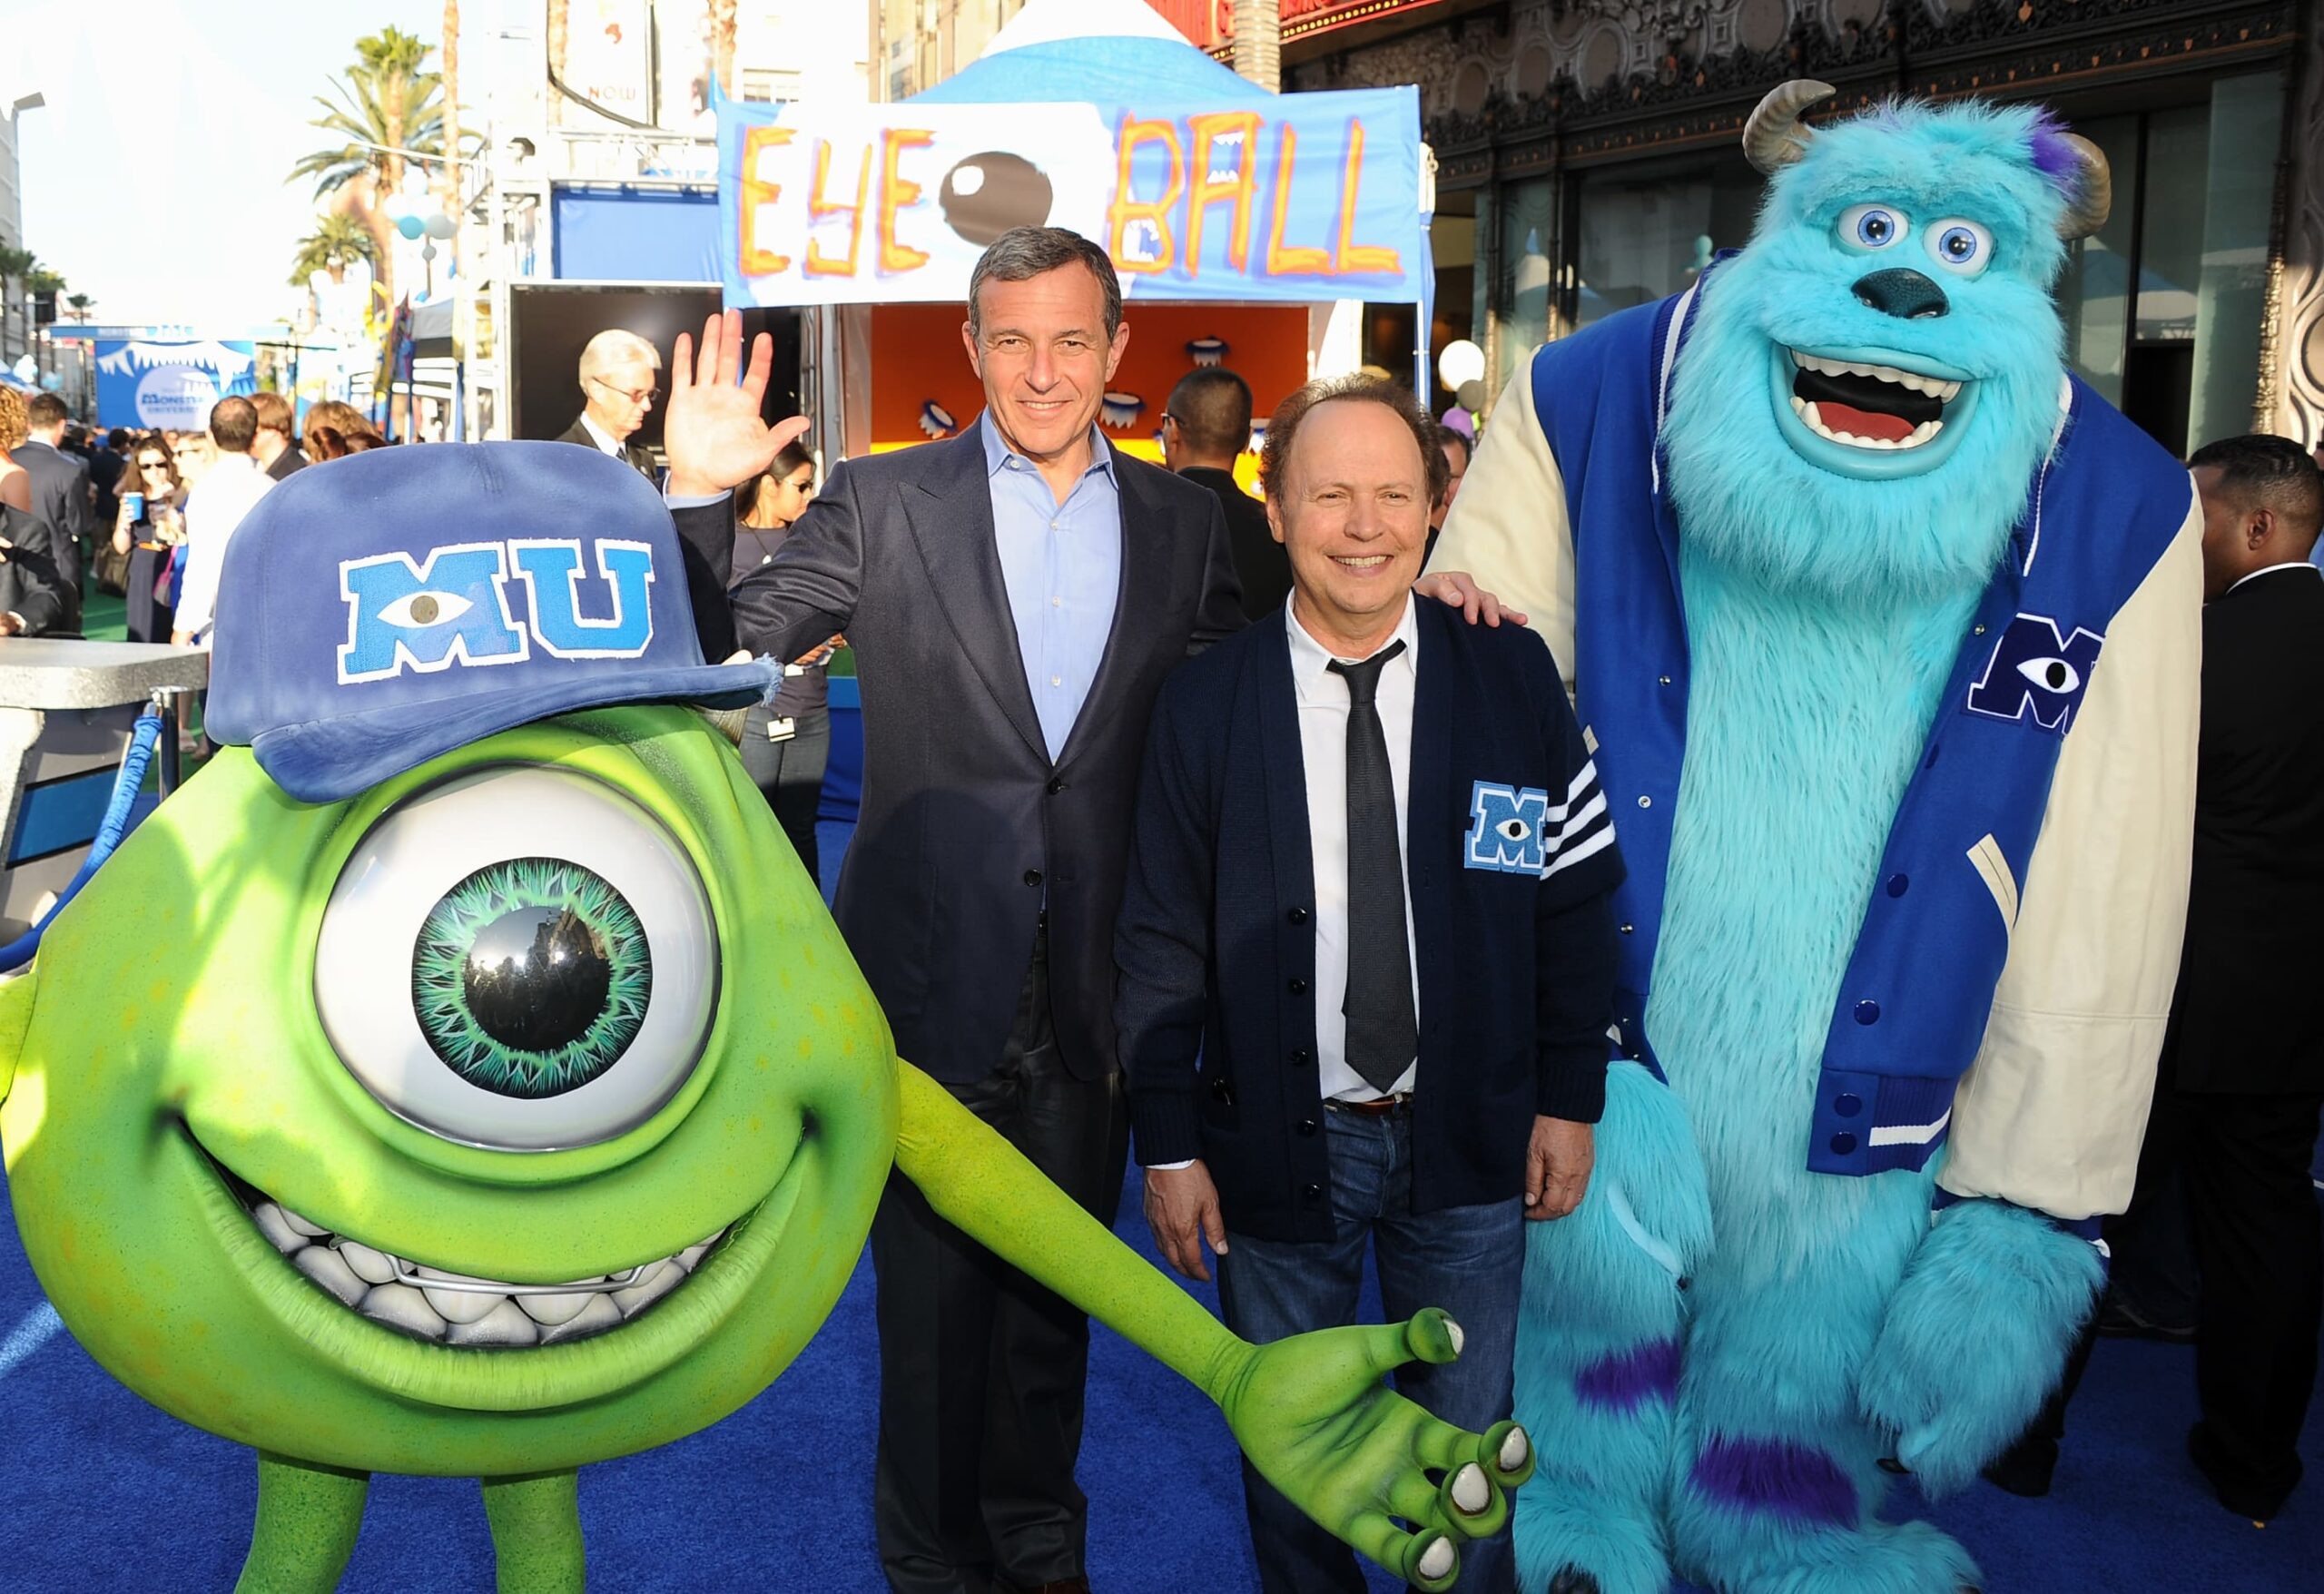 Disney’s Bob Iger says Pixar was ‘probably the best’ acquisition as CEO